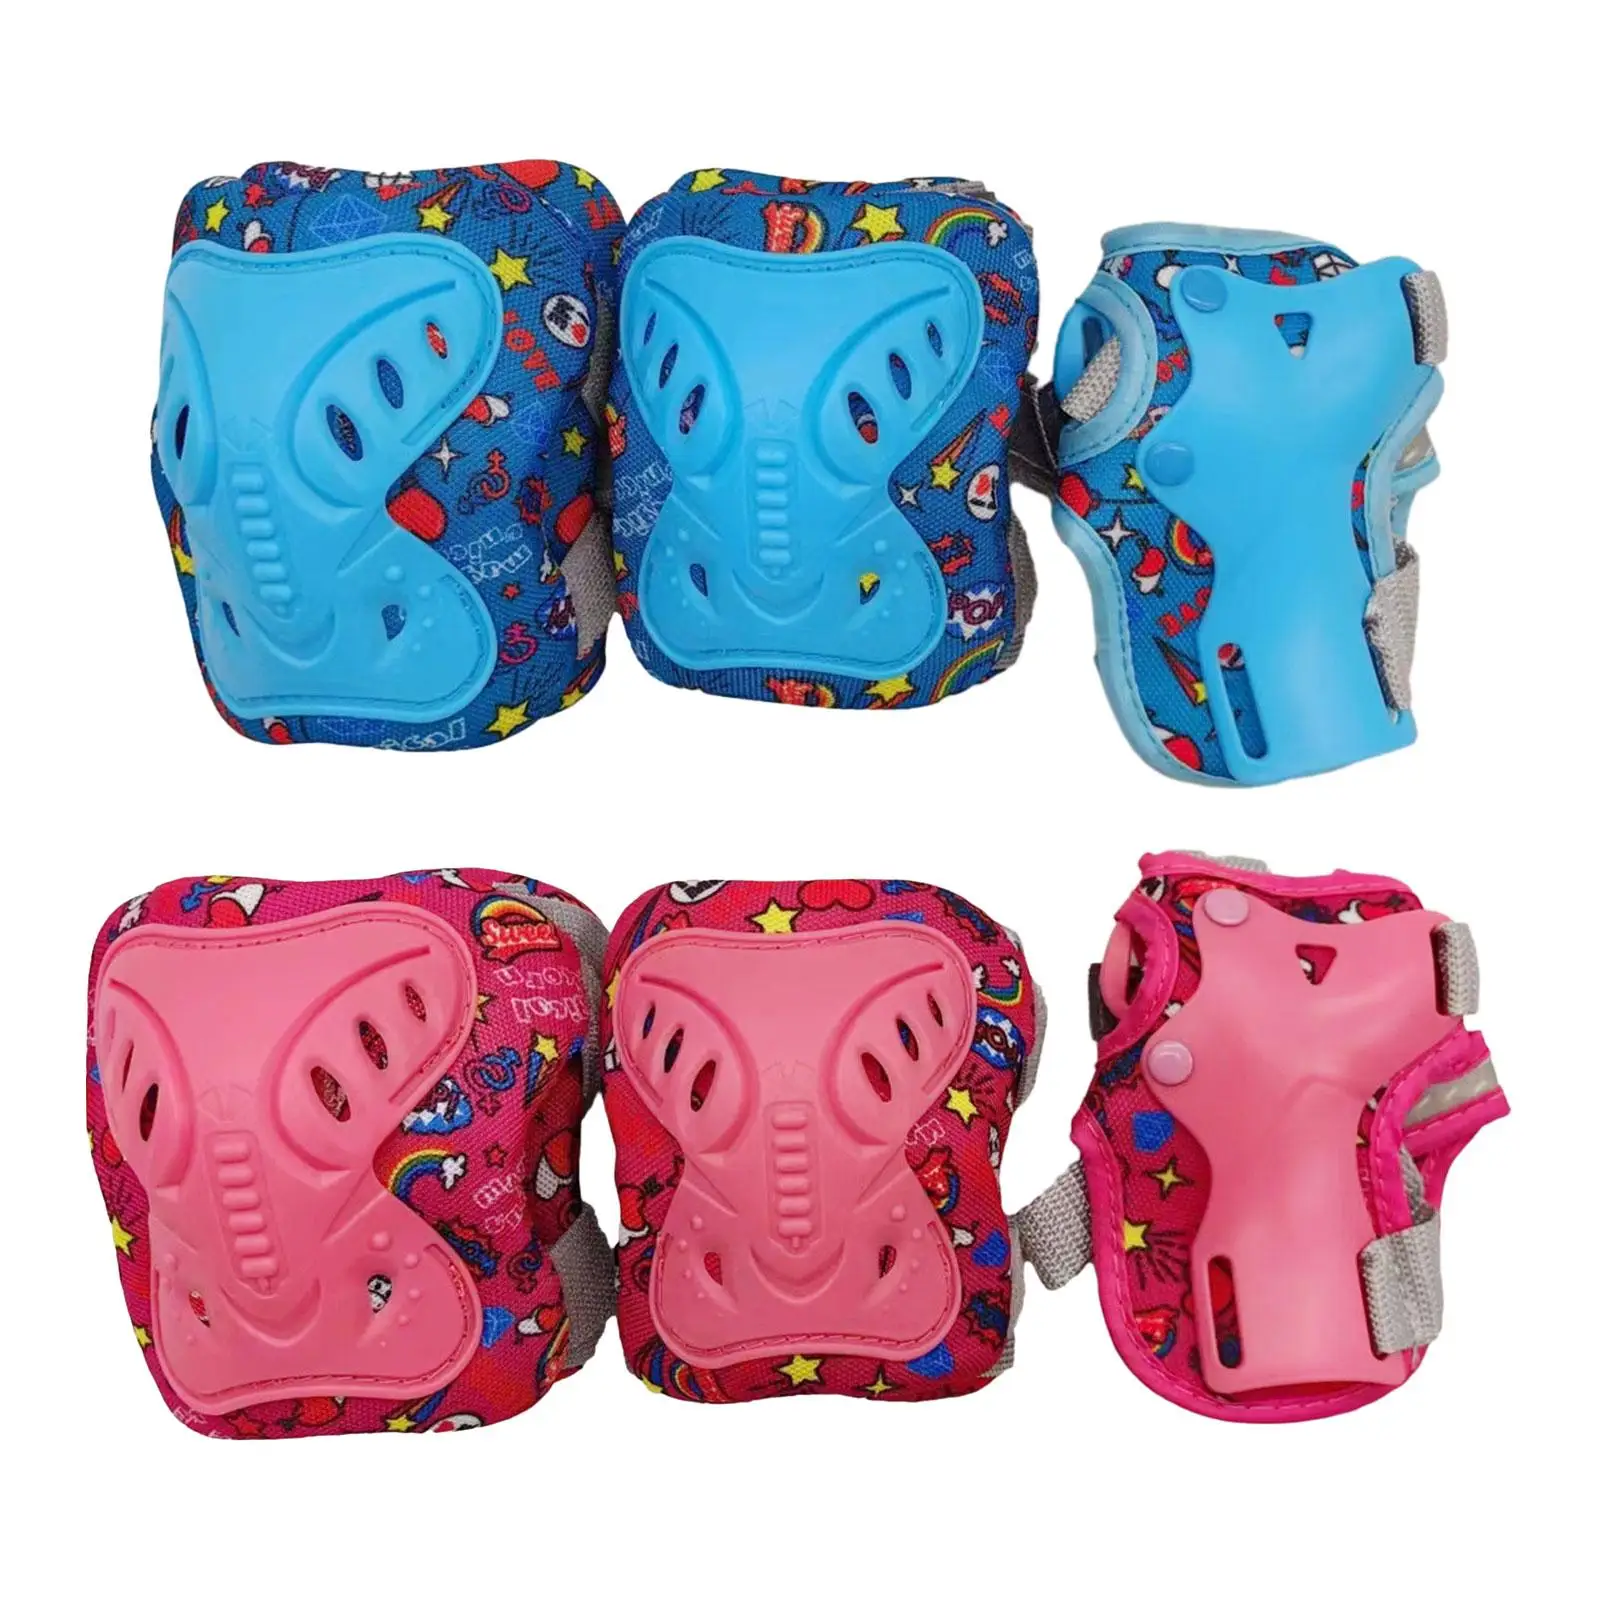 Knee Elbow Wrist Pads Children Comfortable to Wear Protective Gear Set for BMX Biking Inline Skatings Outdoor Activities Cycling